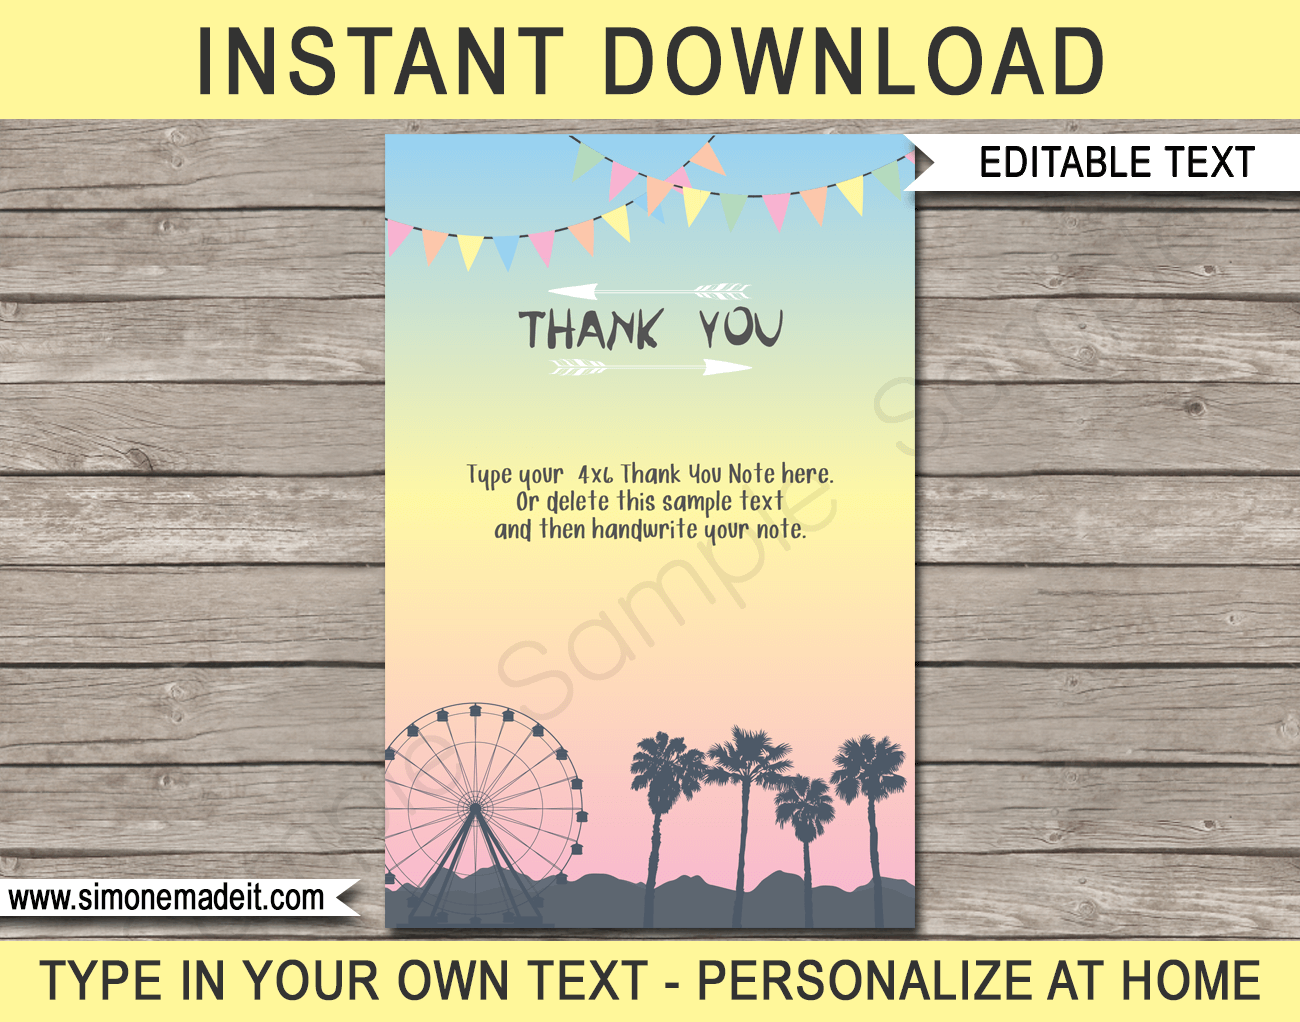 Printable Festival Themed Party Thank You Cards - editable template - Festival Inspired Birthday Party - Instant Download via simonemadeit.com